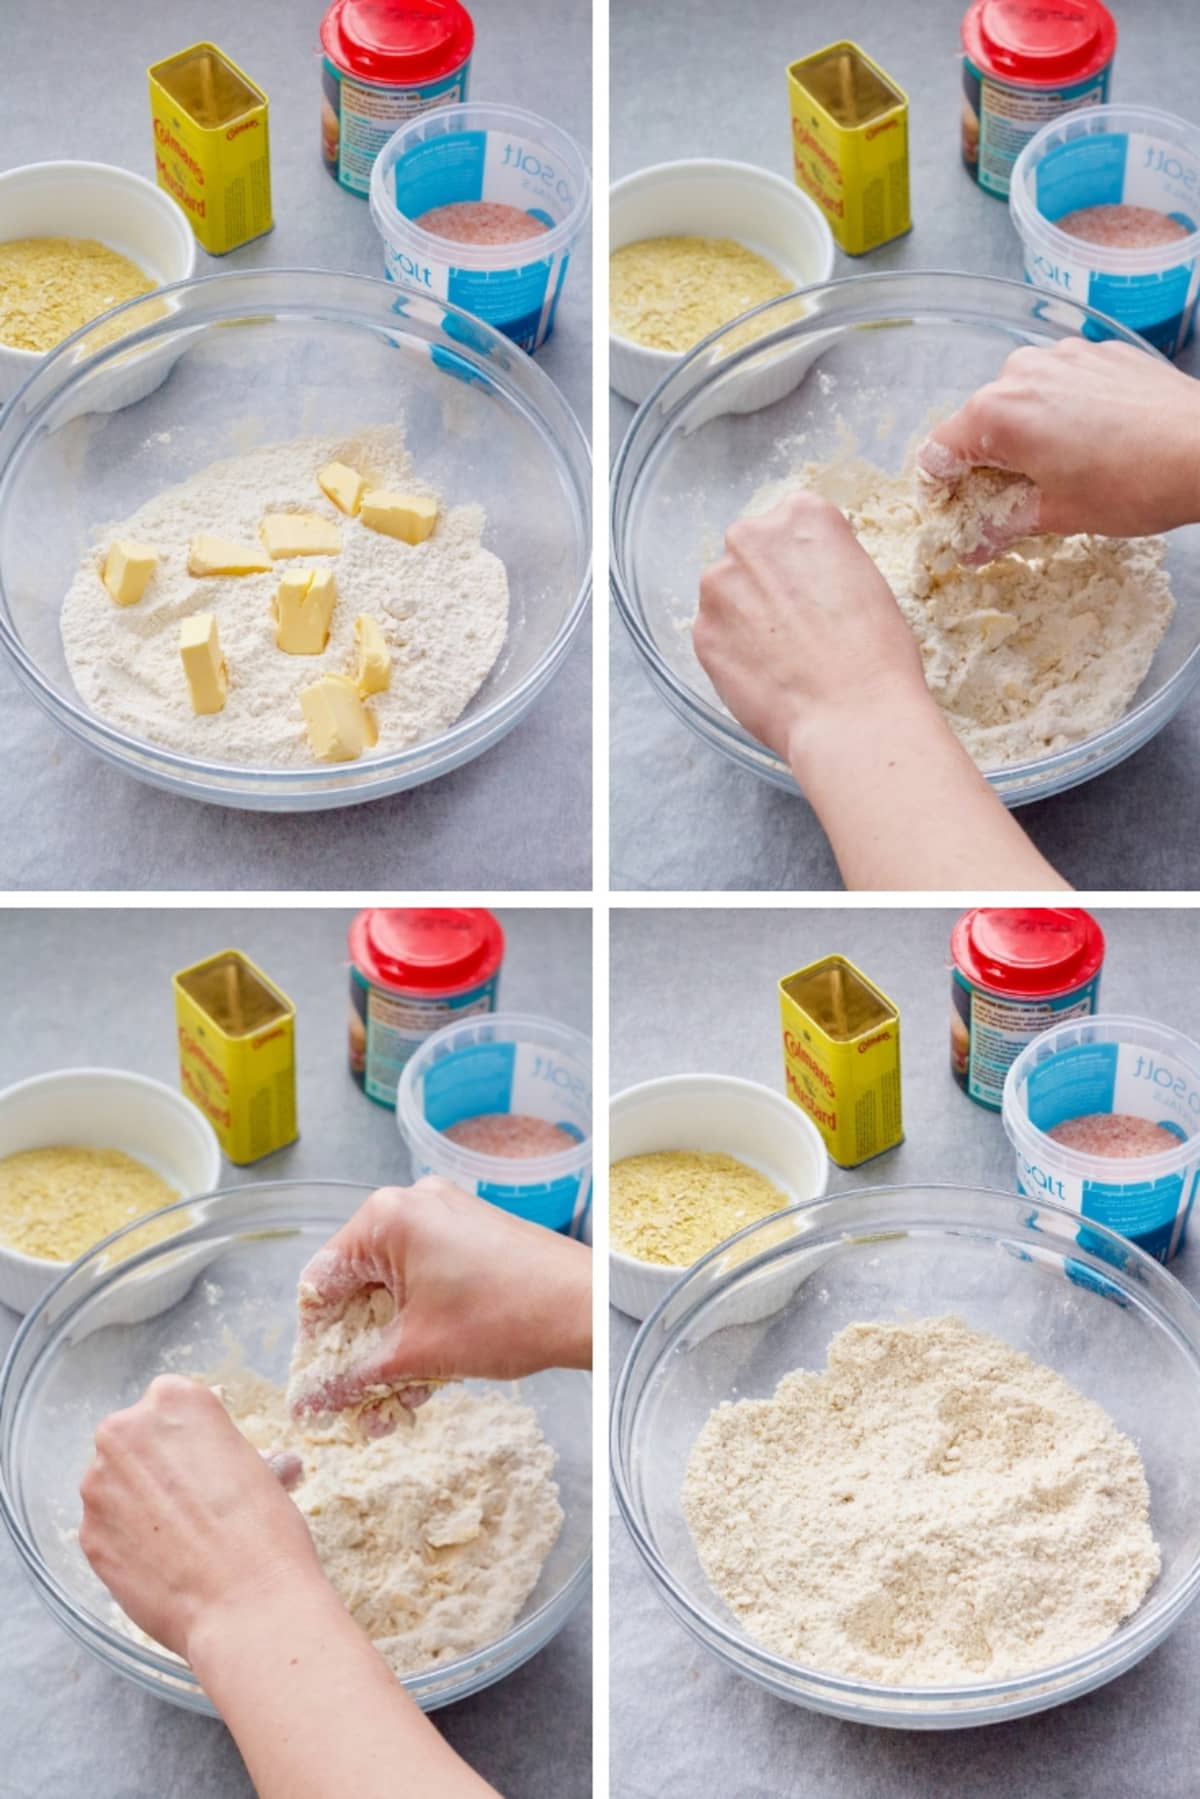 Mixing vegan butter & flour in a bowl until incorporated.